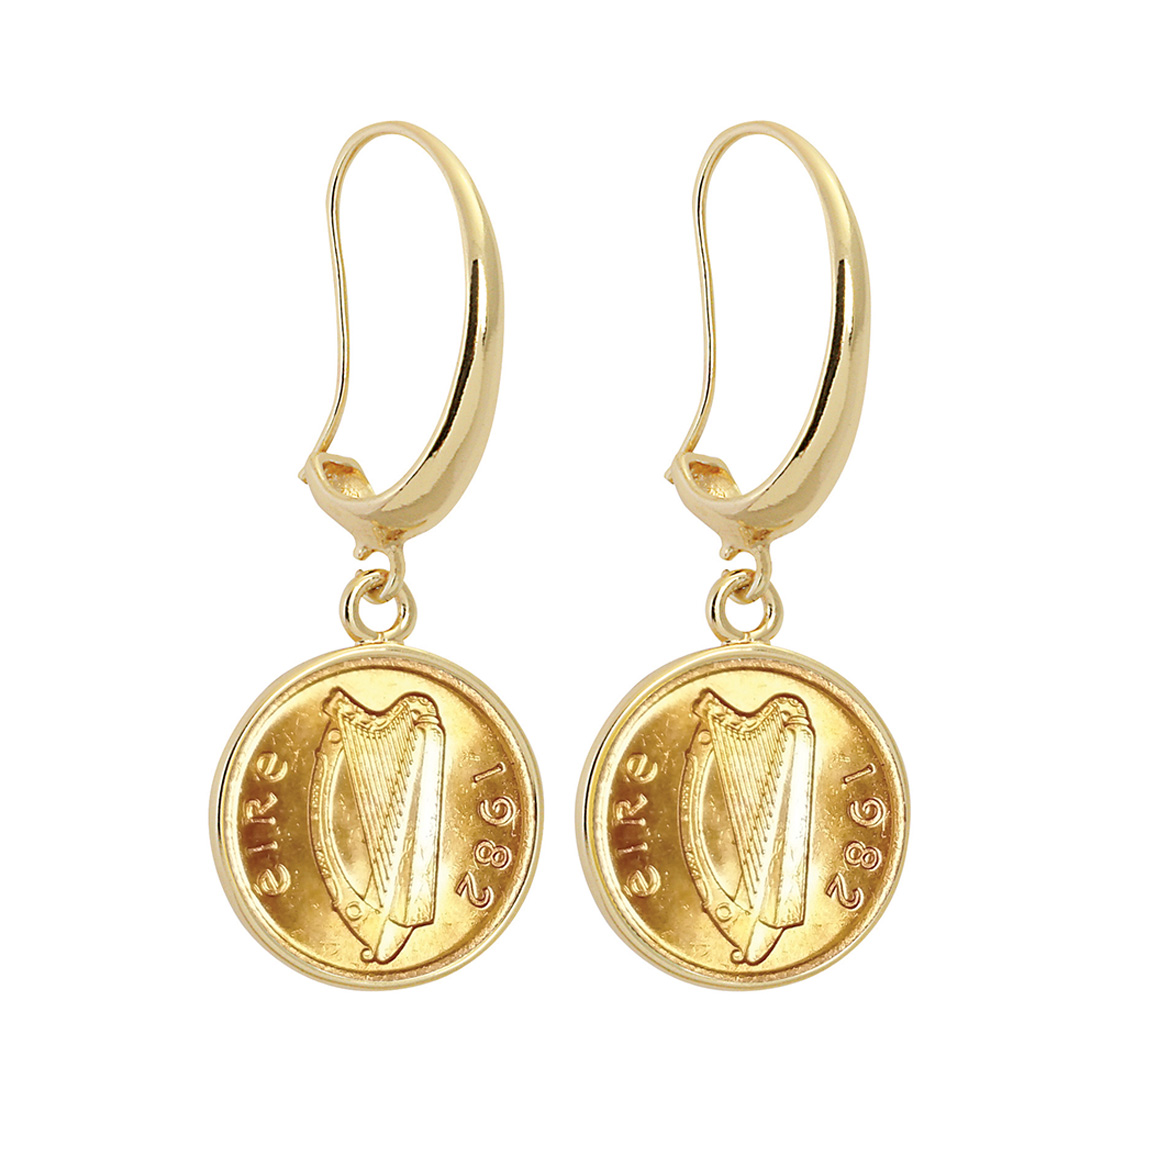 Picture of American Coin Treasures 17016 24 Kt Gold Layered Irish Half Penny Coin Goldtone Earrings, Gold